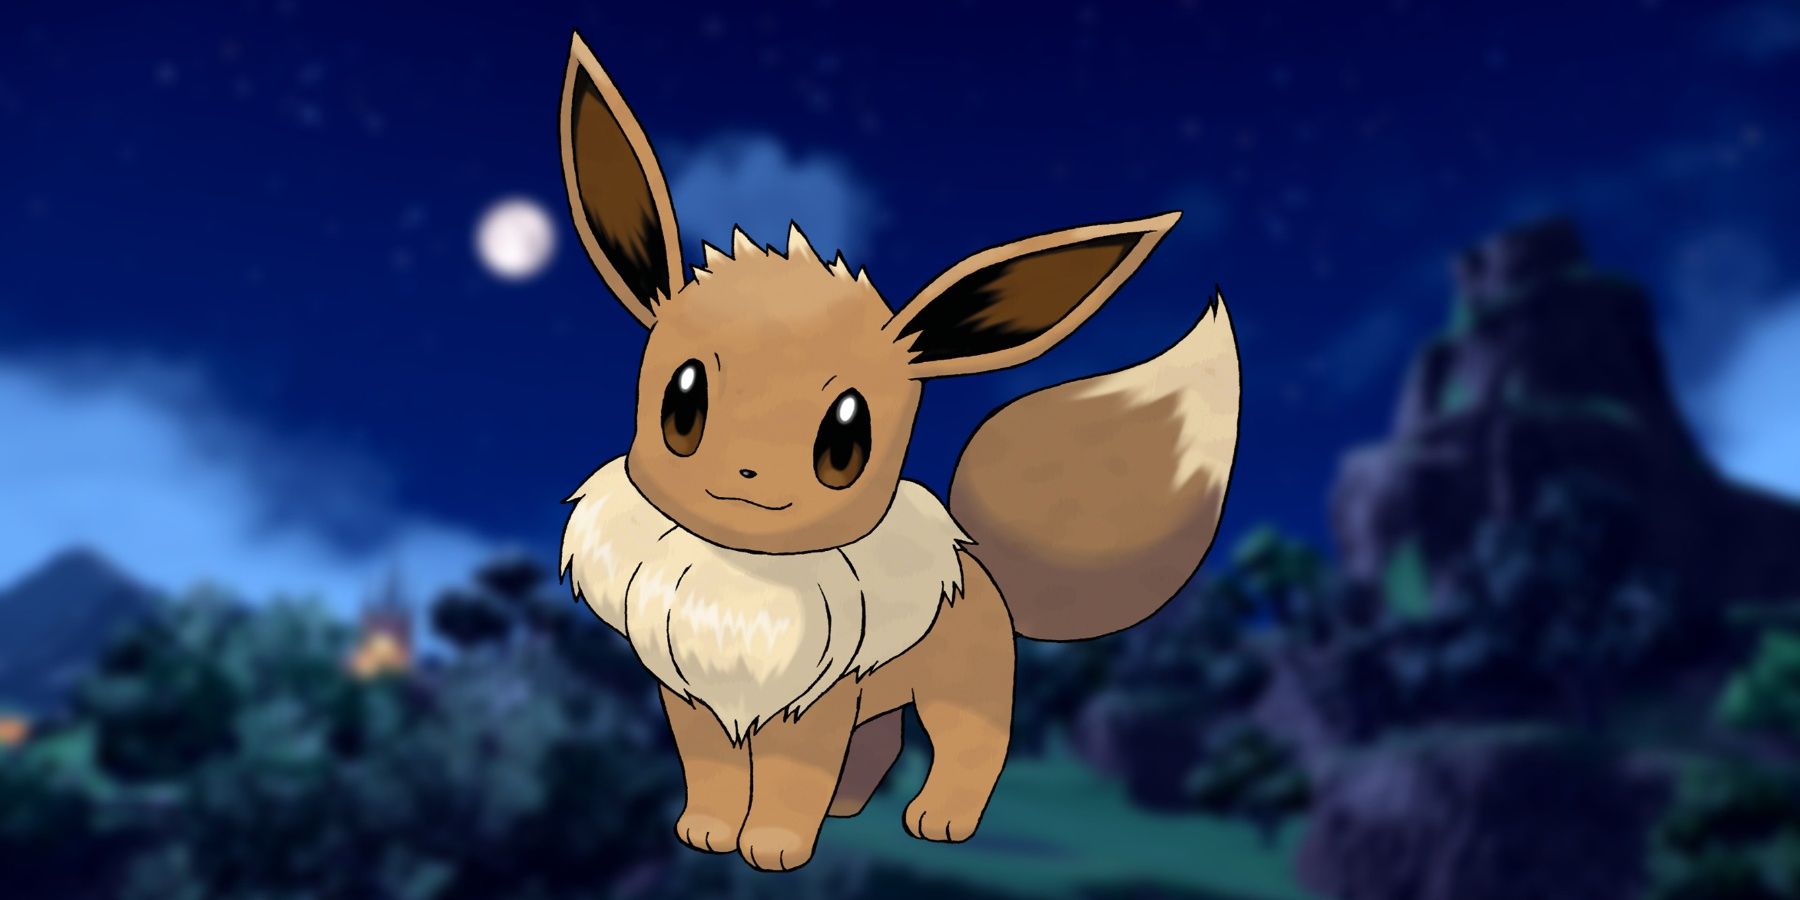 Eevee evolution for every type (some are concept art)  Pokemon eevee  evolutions, Pokemon eevee, Eevee evolutions